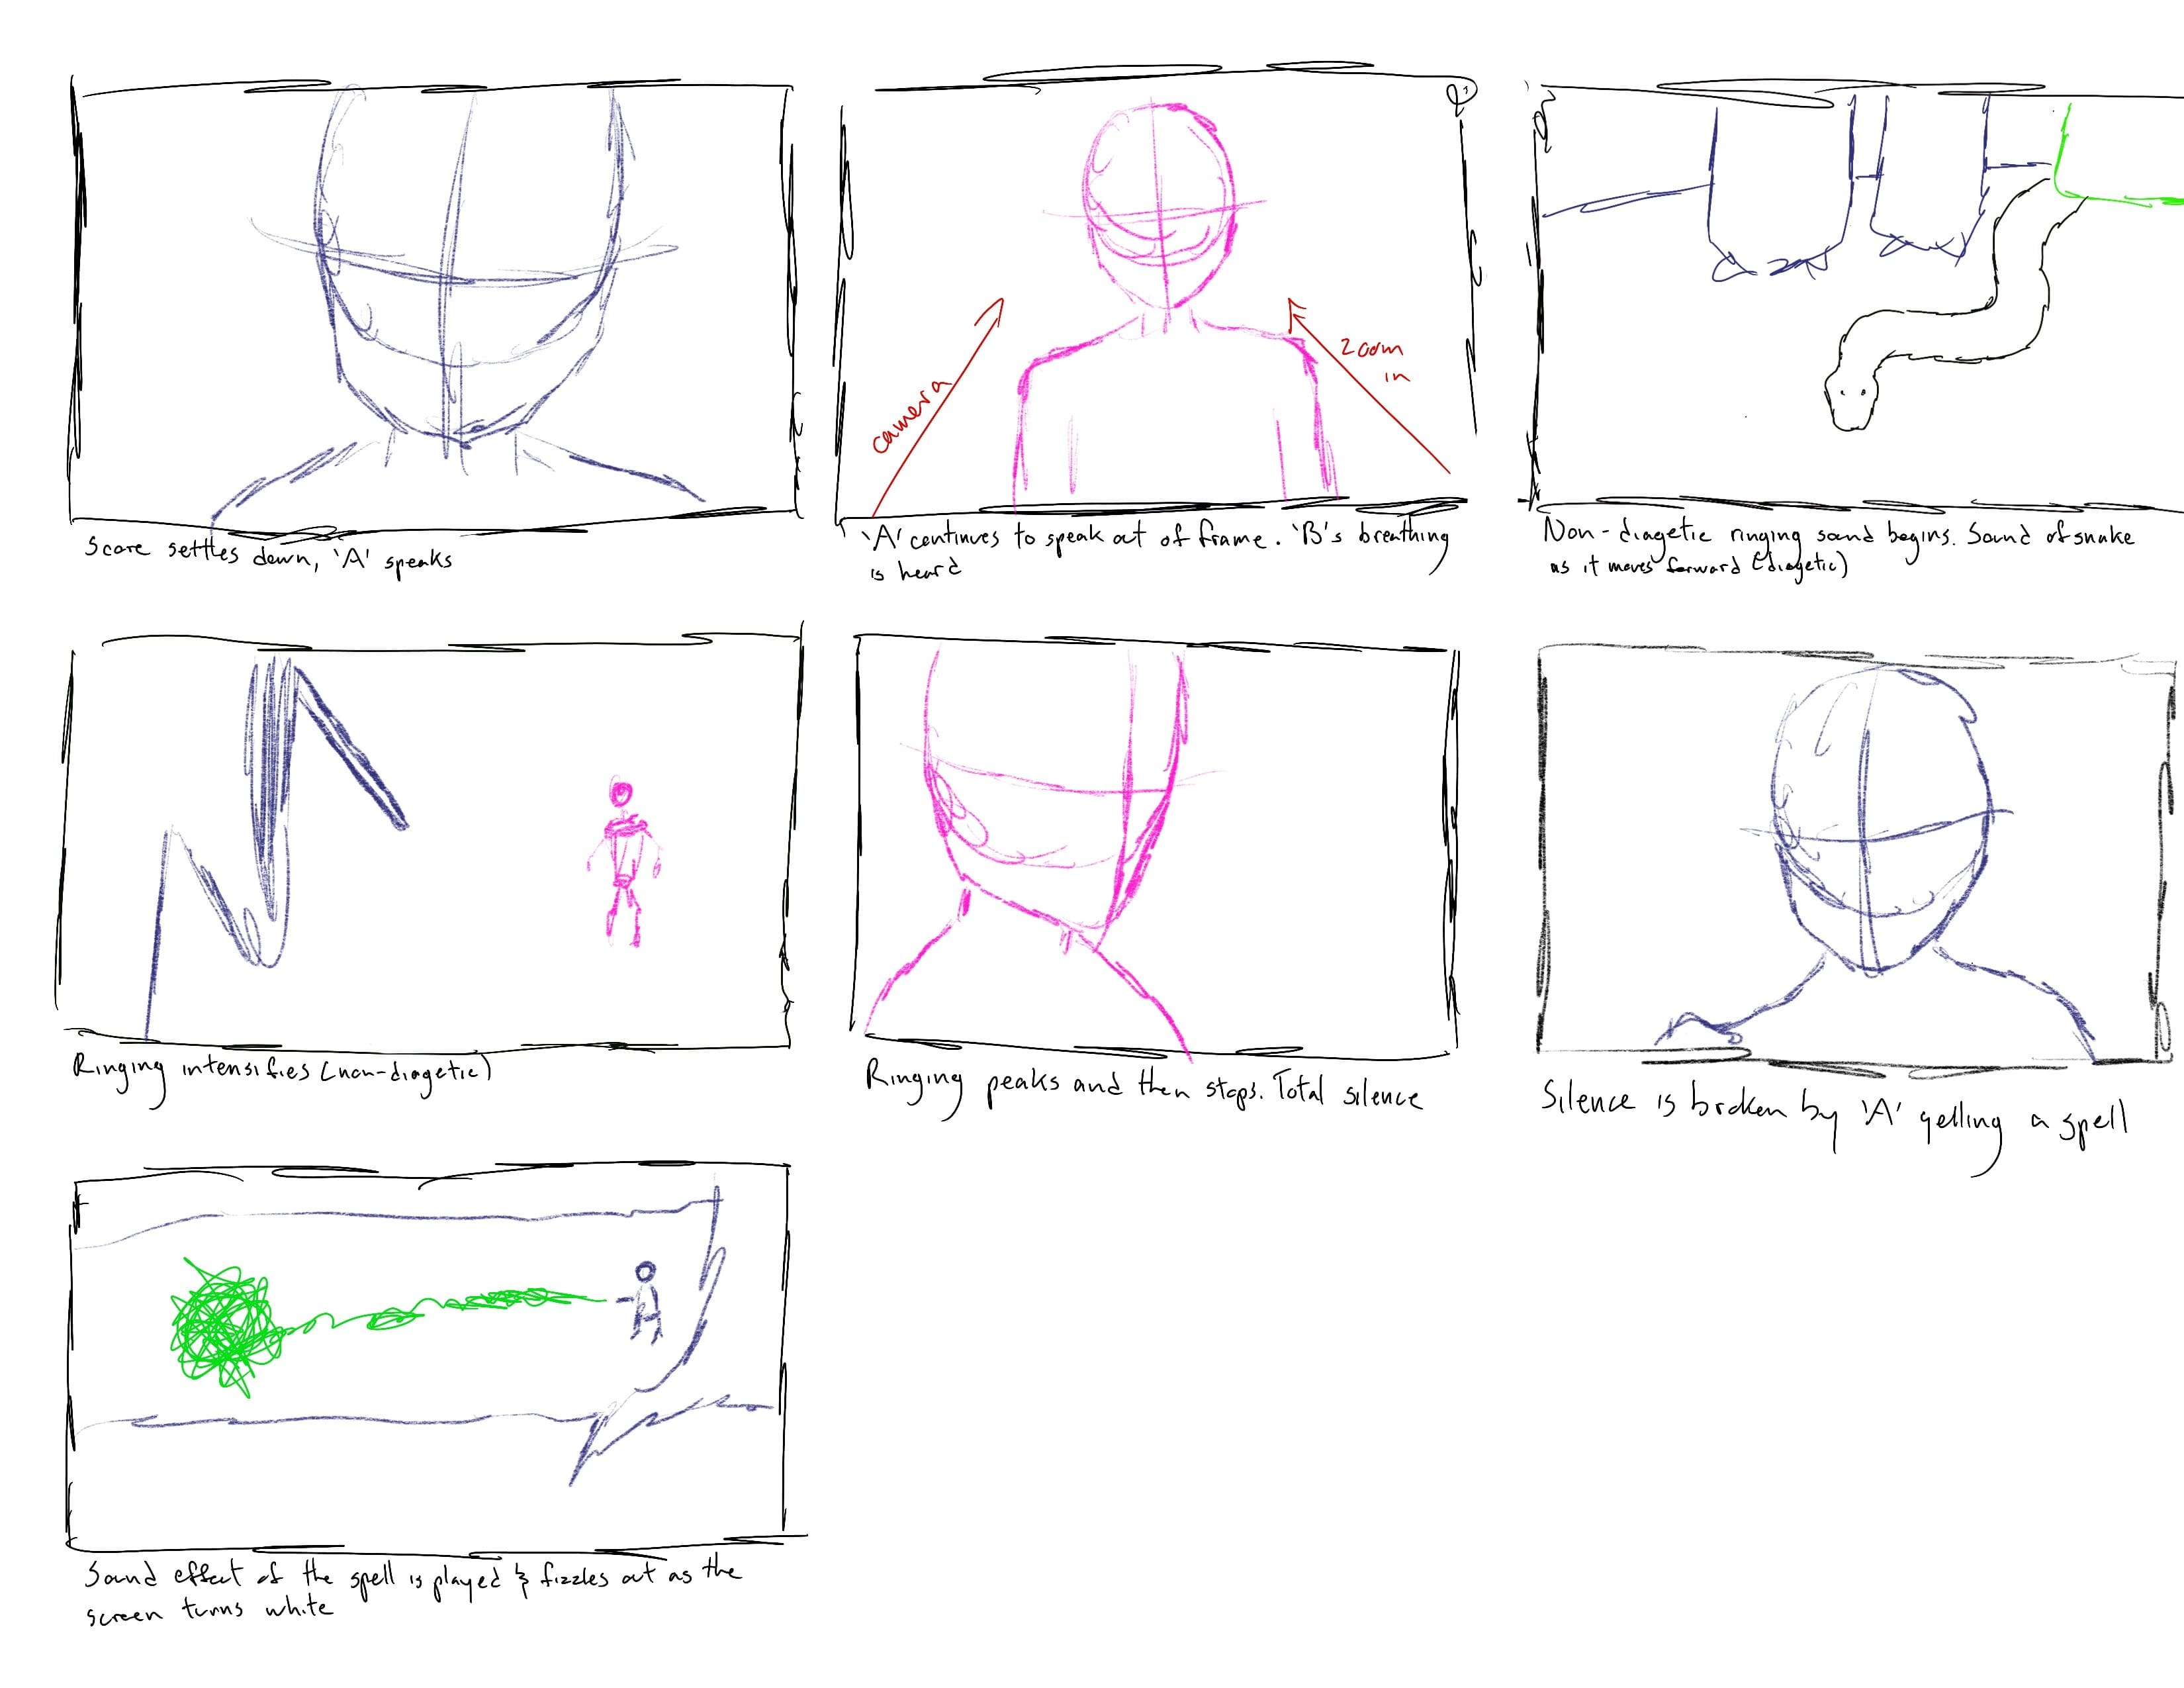 storyboard of a sequence in the film continued